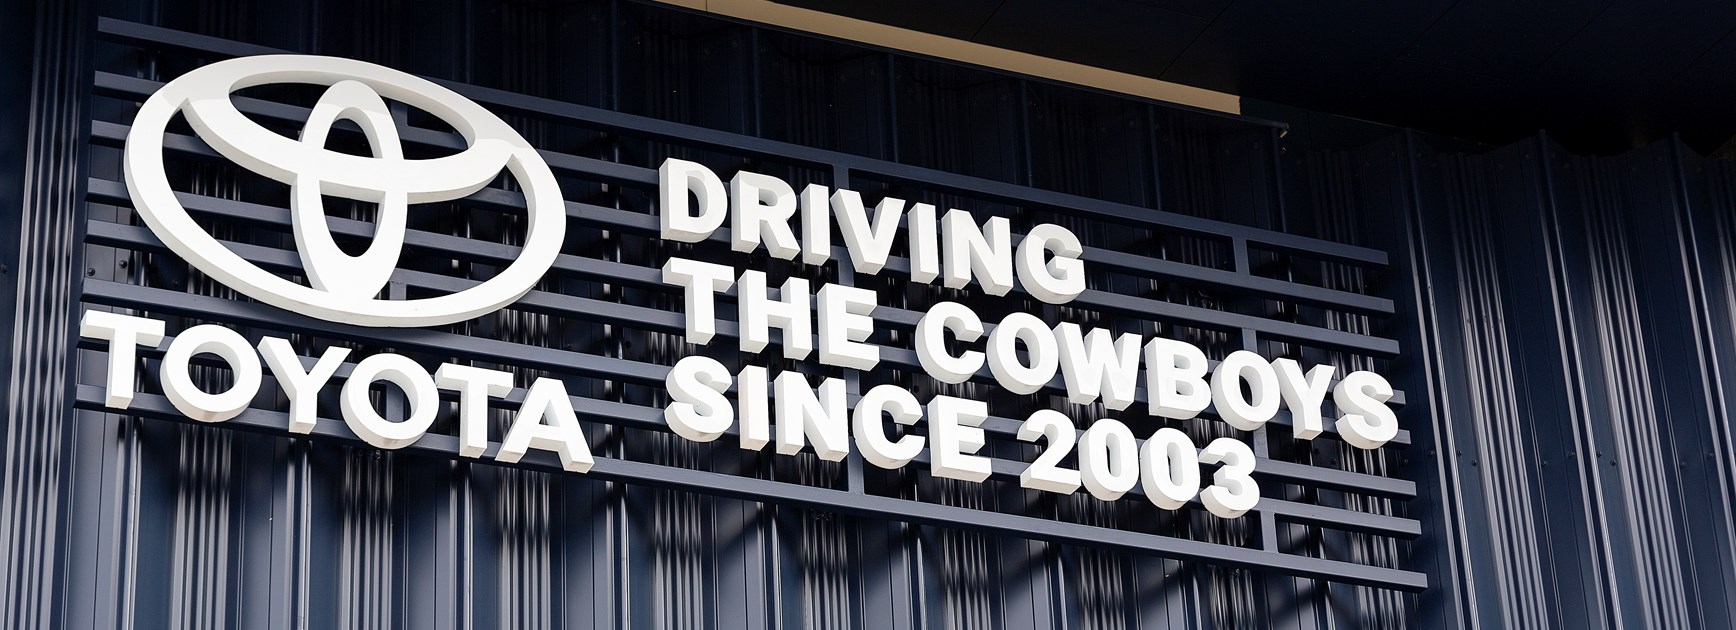 Cowboys and Toyota to saddle up for 22 seasons